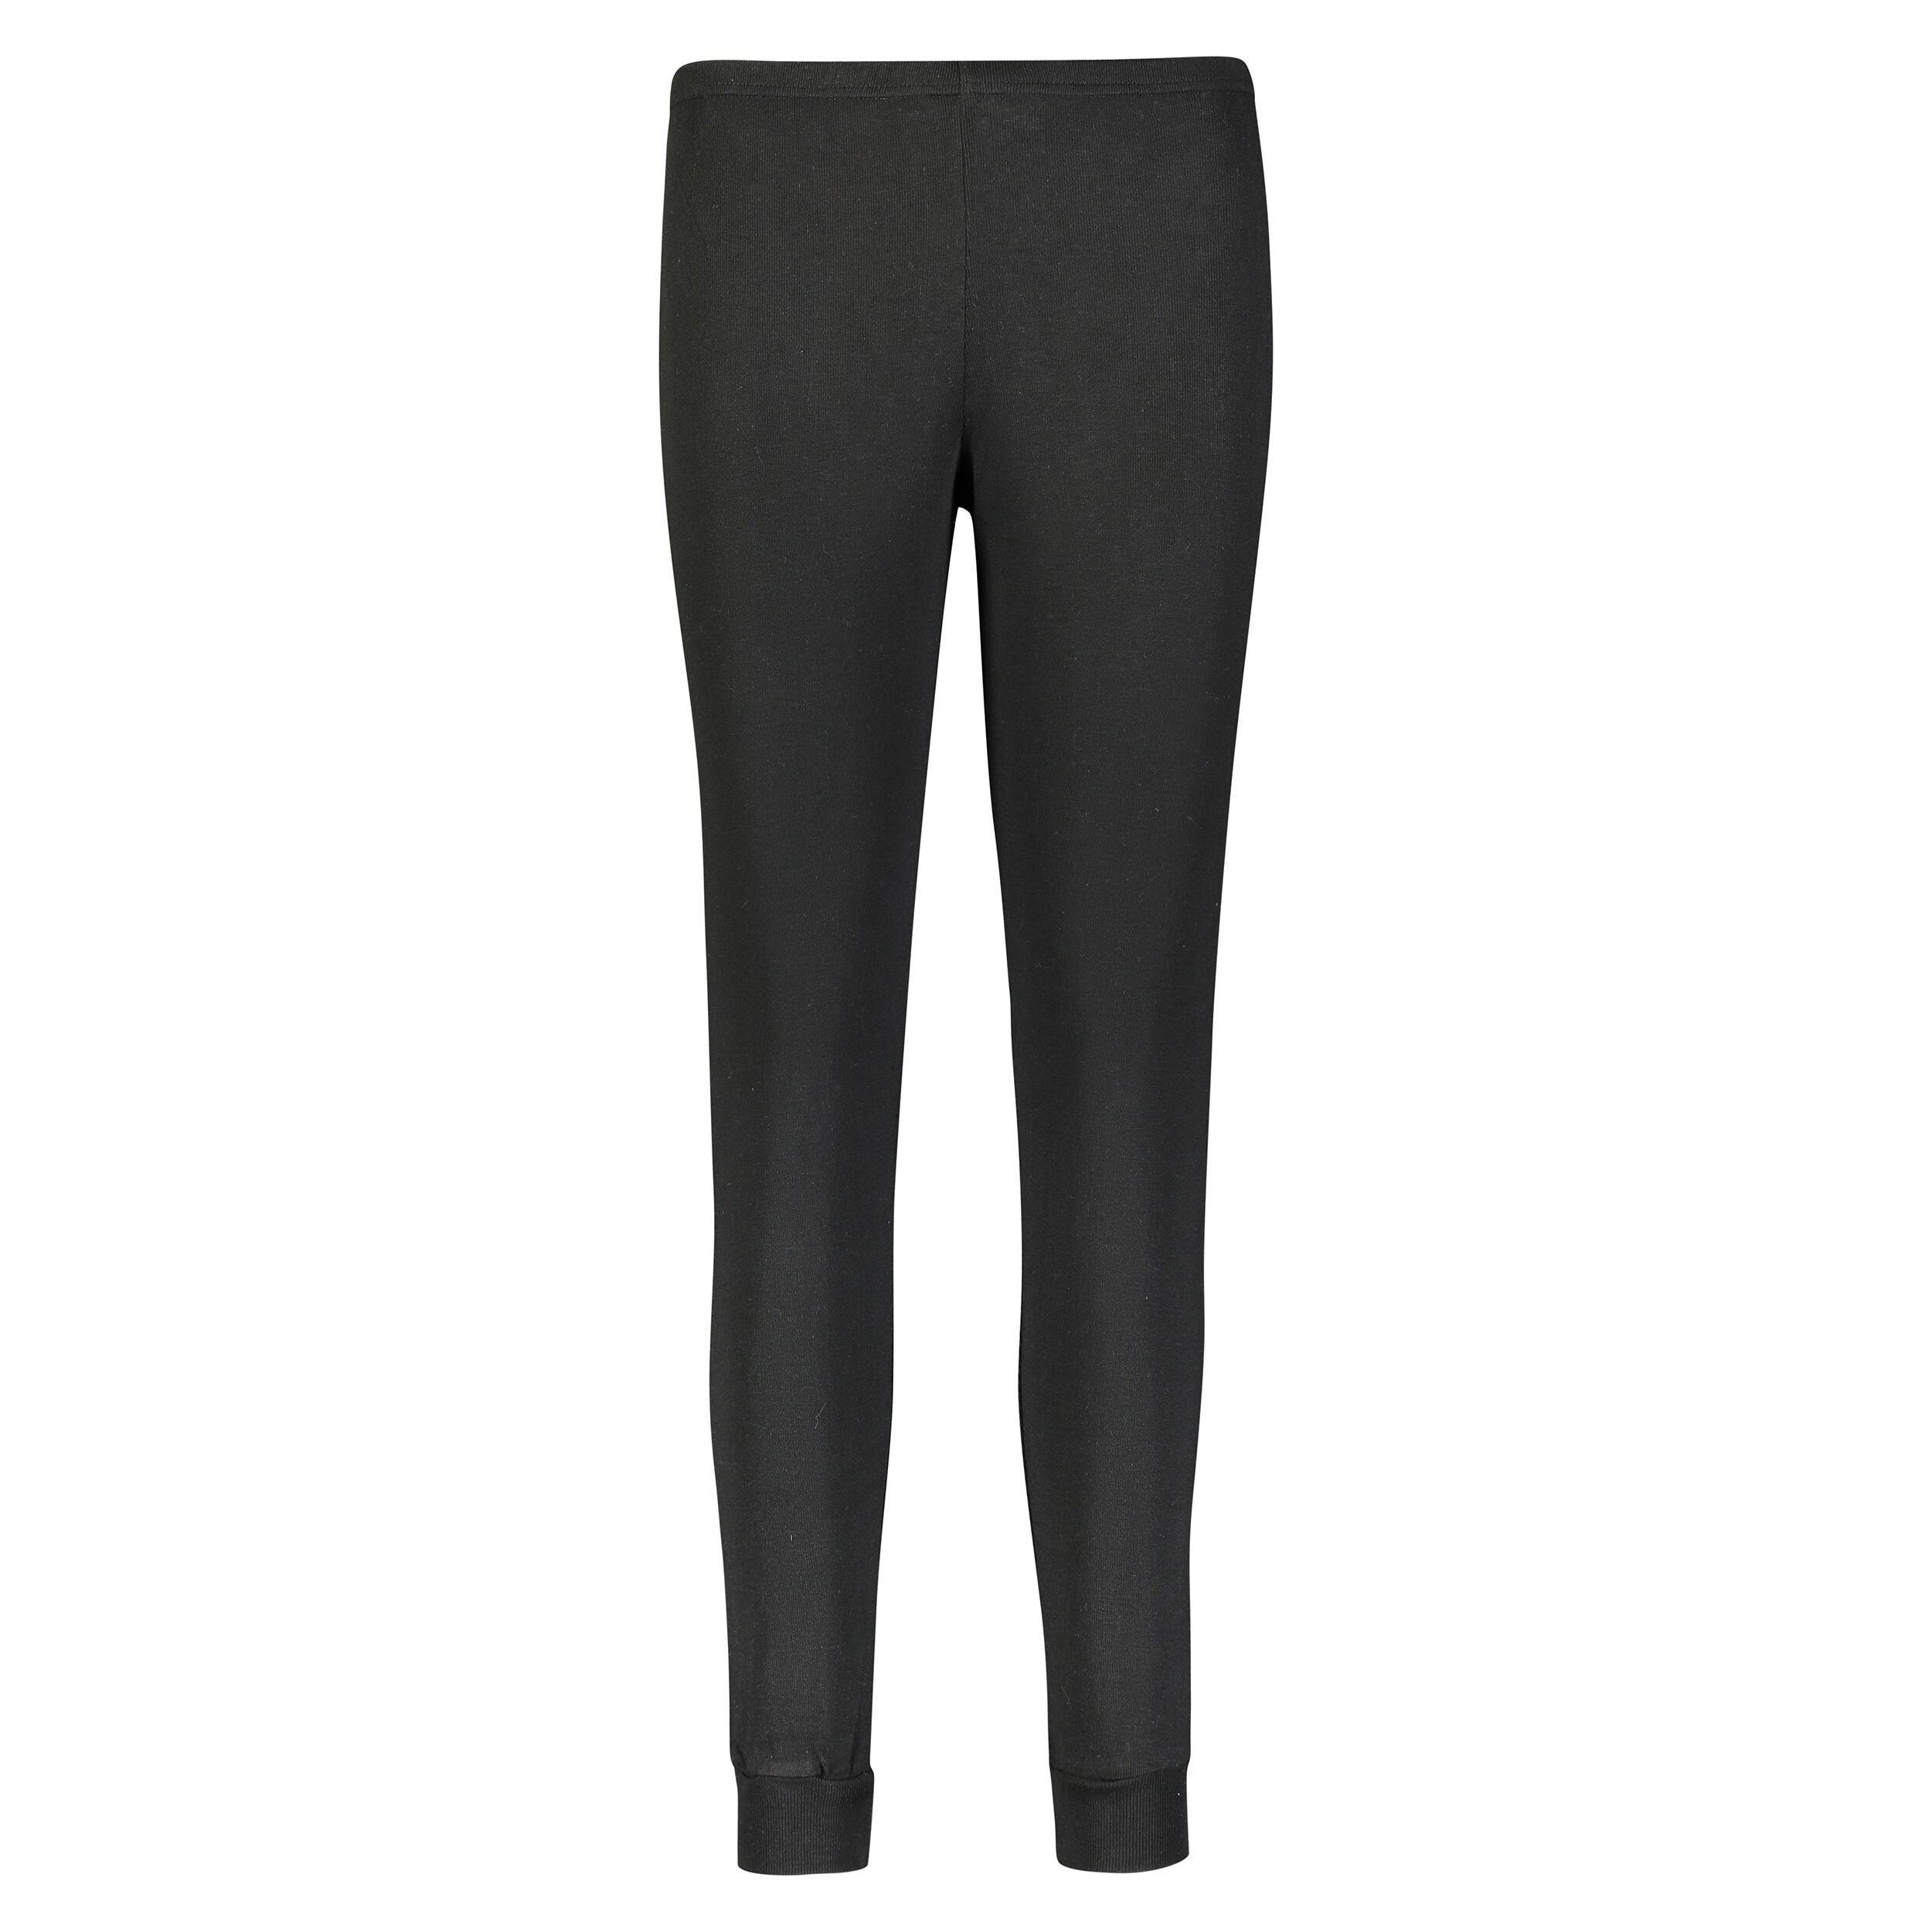 JOGGER BLACK Solid Knit Mid Rise